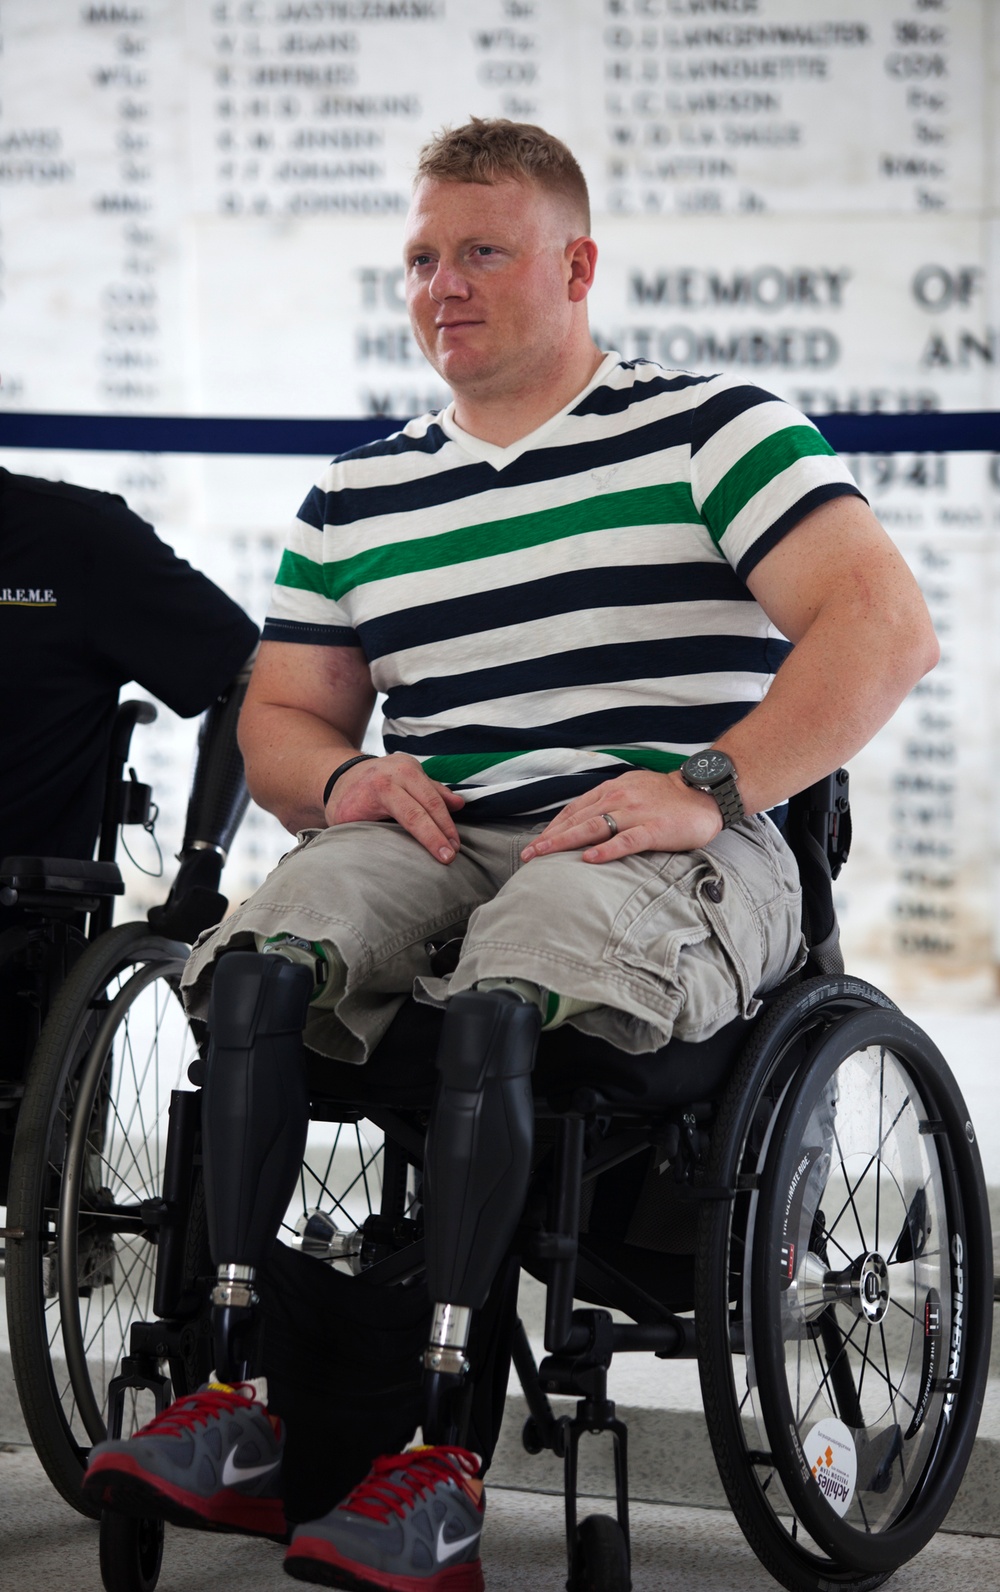 Wounded warrior gets ‘X-T.R.E.M.E.’ in Hawaii